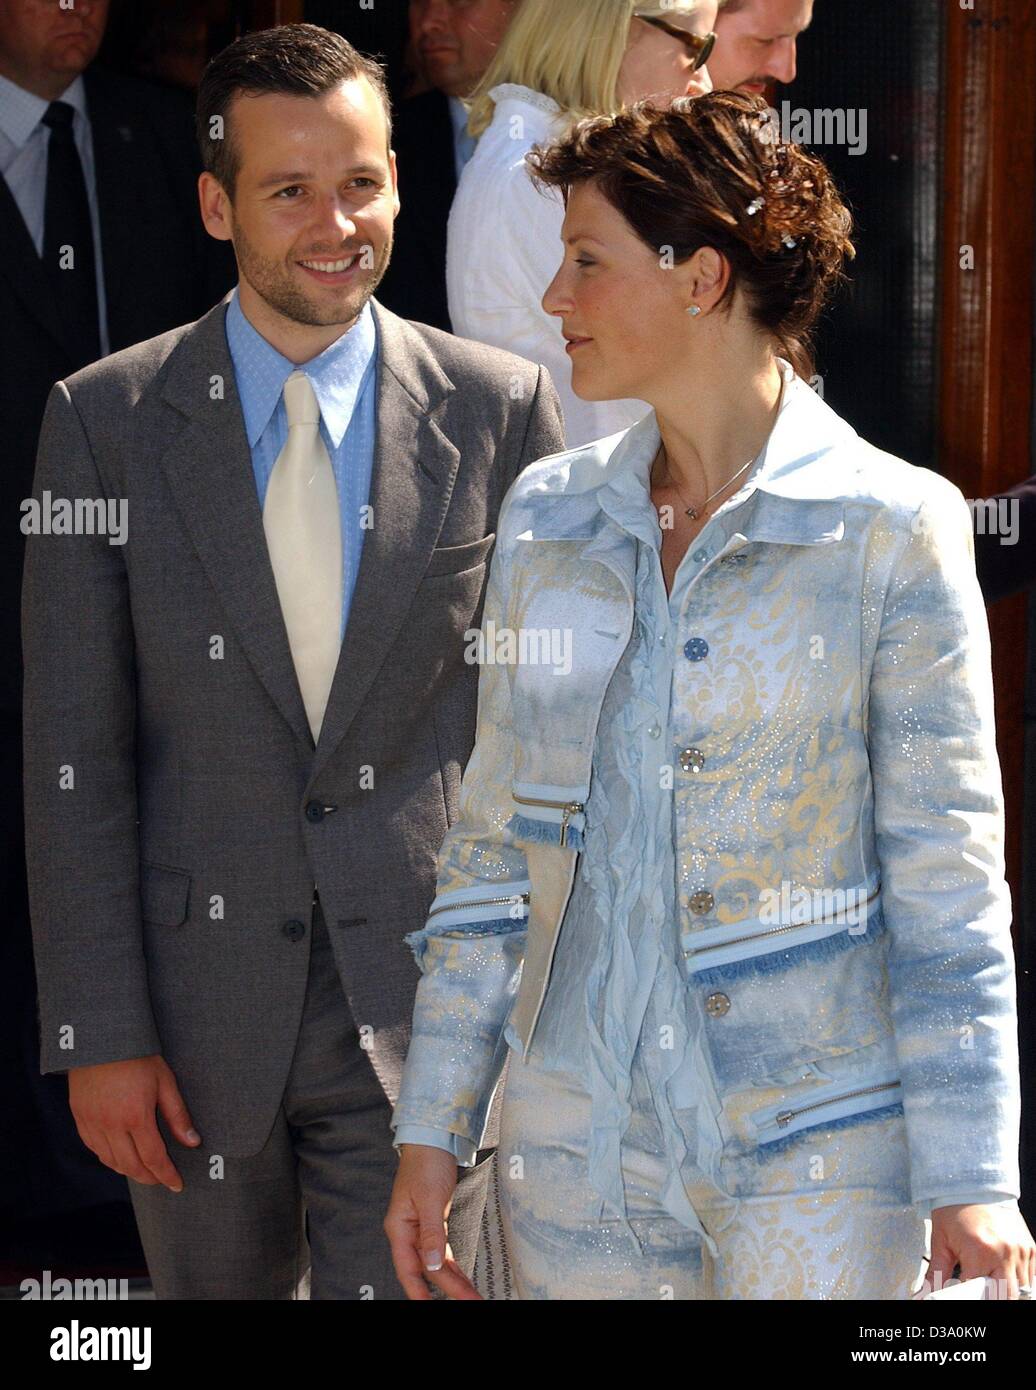 (dpa) - Princess Maertha Louise of Norway throws a glance at her bridegroom Ari Behn while they make a sightseeing tour with their royal guest in Trondheim prior to their wedding, 23 May 2002. Maertha Louise will marry her fiance Ari Behn in the cathedral of Trondheim, Norway, 24 May. Stock Photo